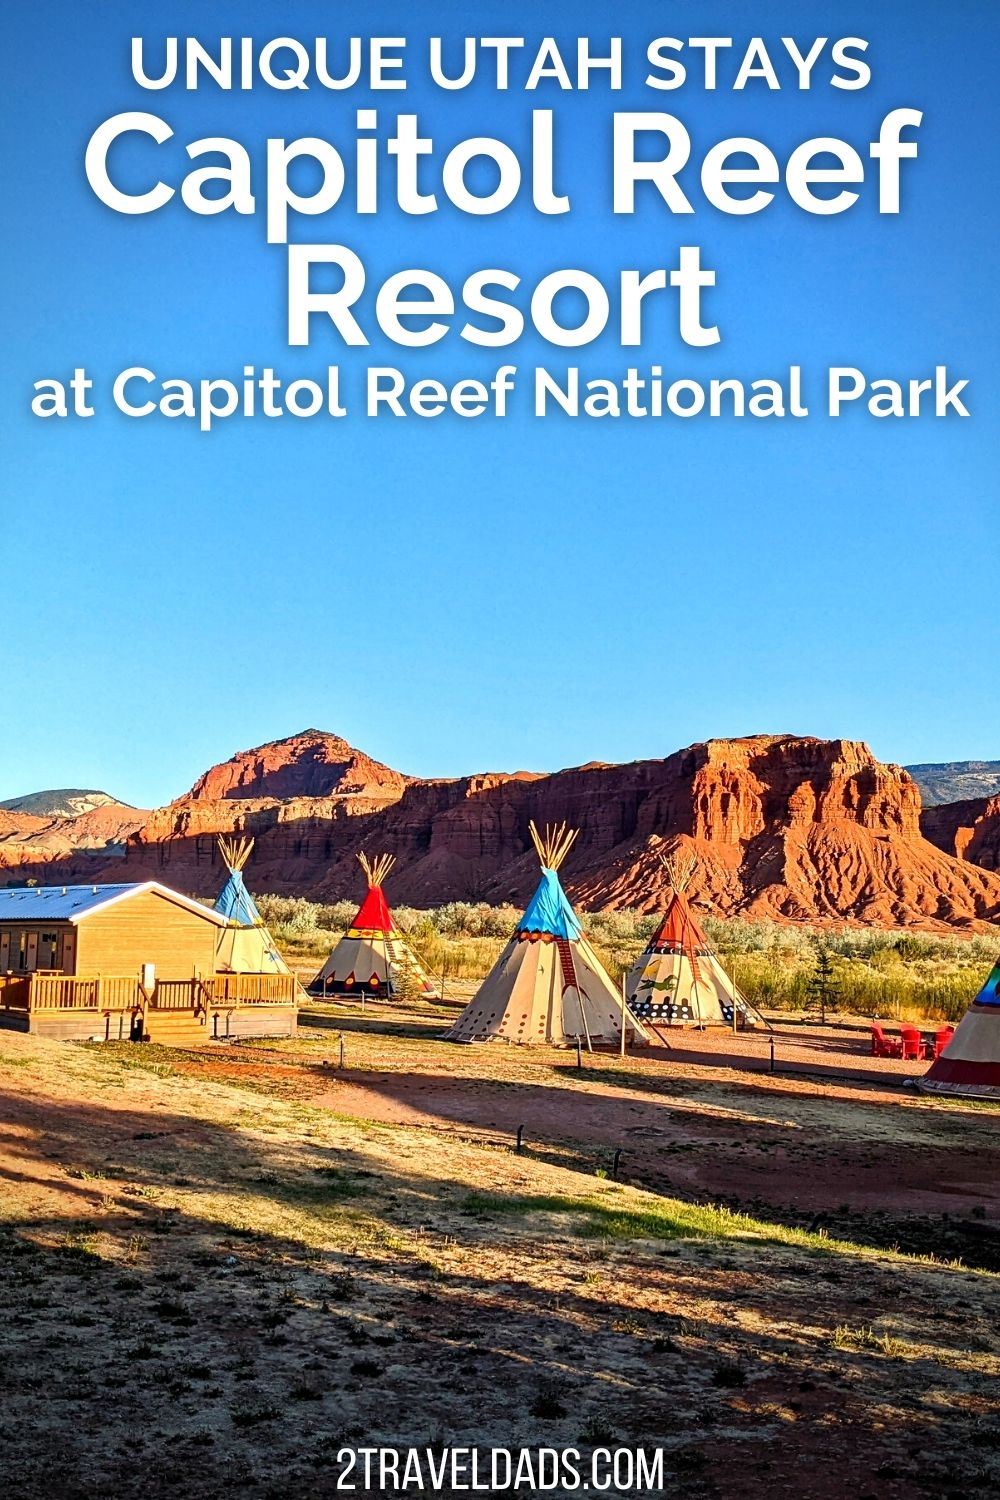 The Capitol Reef Resort at the edge of Capitol Reef National Park is one of the most unique properties we've seen. Located in the center of the state, this Utah glamping resort is fun with kids, or perfect for an adults-only National Park trip.